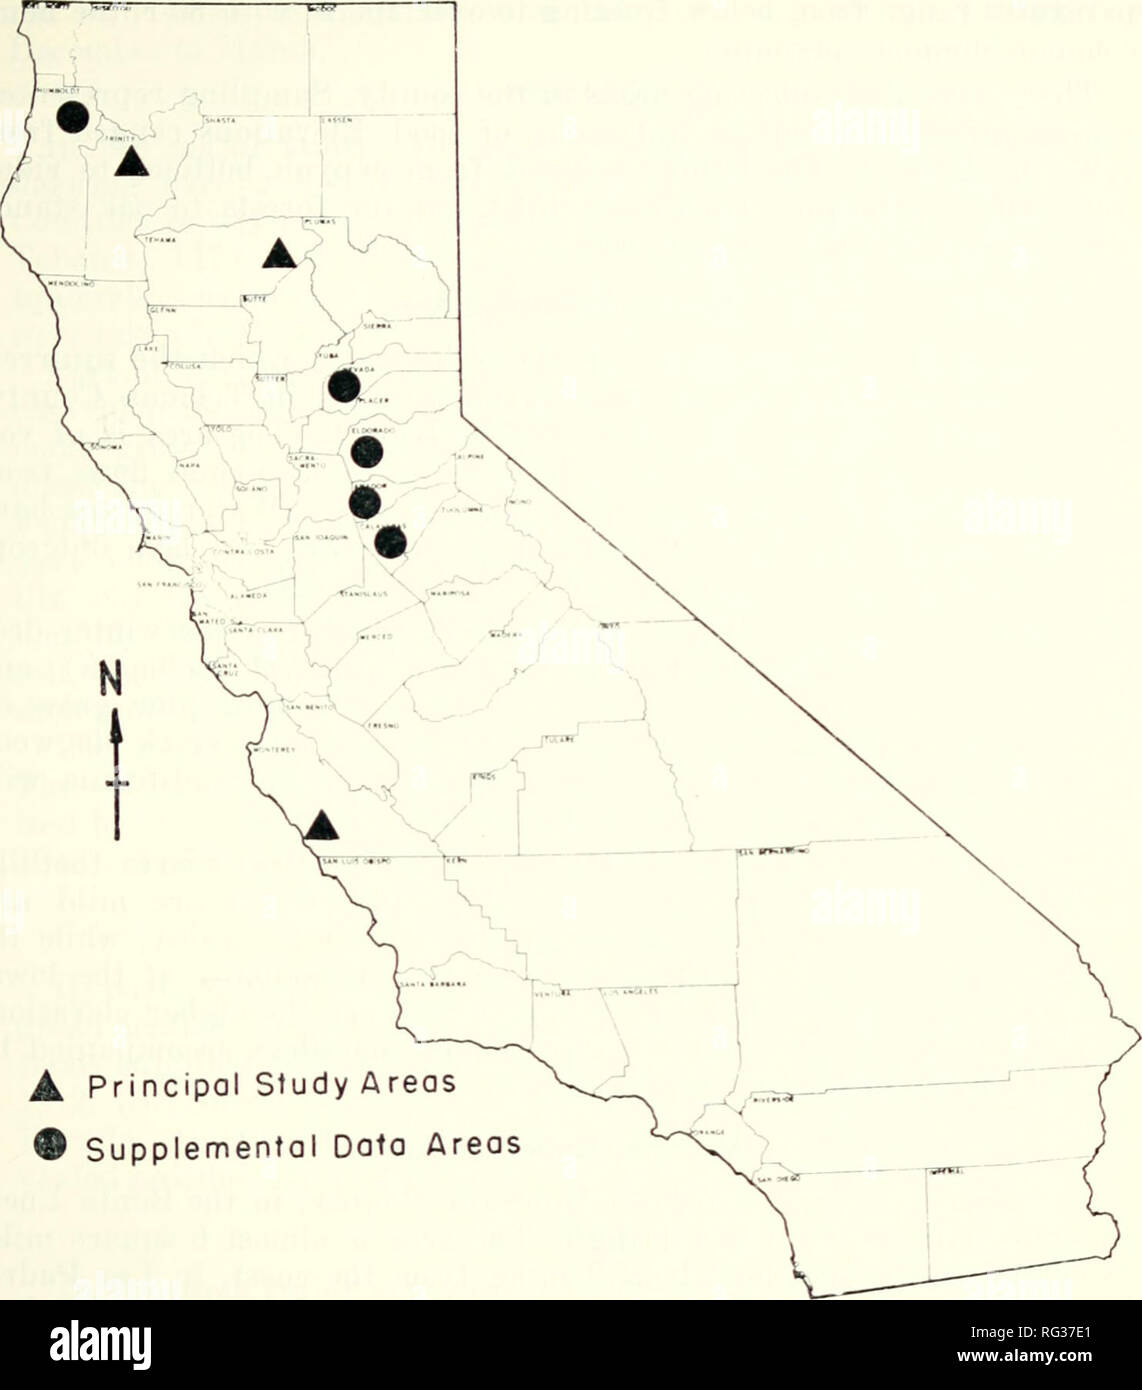 . California fish and game. Fisheries -- California; Game and game-birds -- California; Fishes -- California; Animal Population Groups; Pêches; Gibier; Poissons. GRAY SQUIRREL FOOD HABITS 37. A Principal Study Areas • Supplemental Data Areas FIGURE 1—Location mcp, showing gray squirrel collecting areas. Drawing by C/iffa Corson. extend into western Siskiyou and western Shasta Counties, part of Del Norte County, and southwestern Oregon. Yellow pine (Pinus ponderosa)—Douglas fir (Pseudotsuga m&lt; nziesii) forests form the dominant vegetation of the Klamath Mountains. These forests are intersper Stock Photo